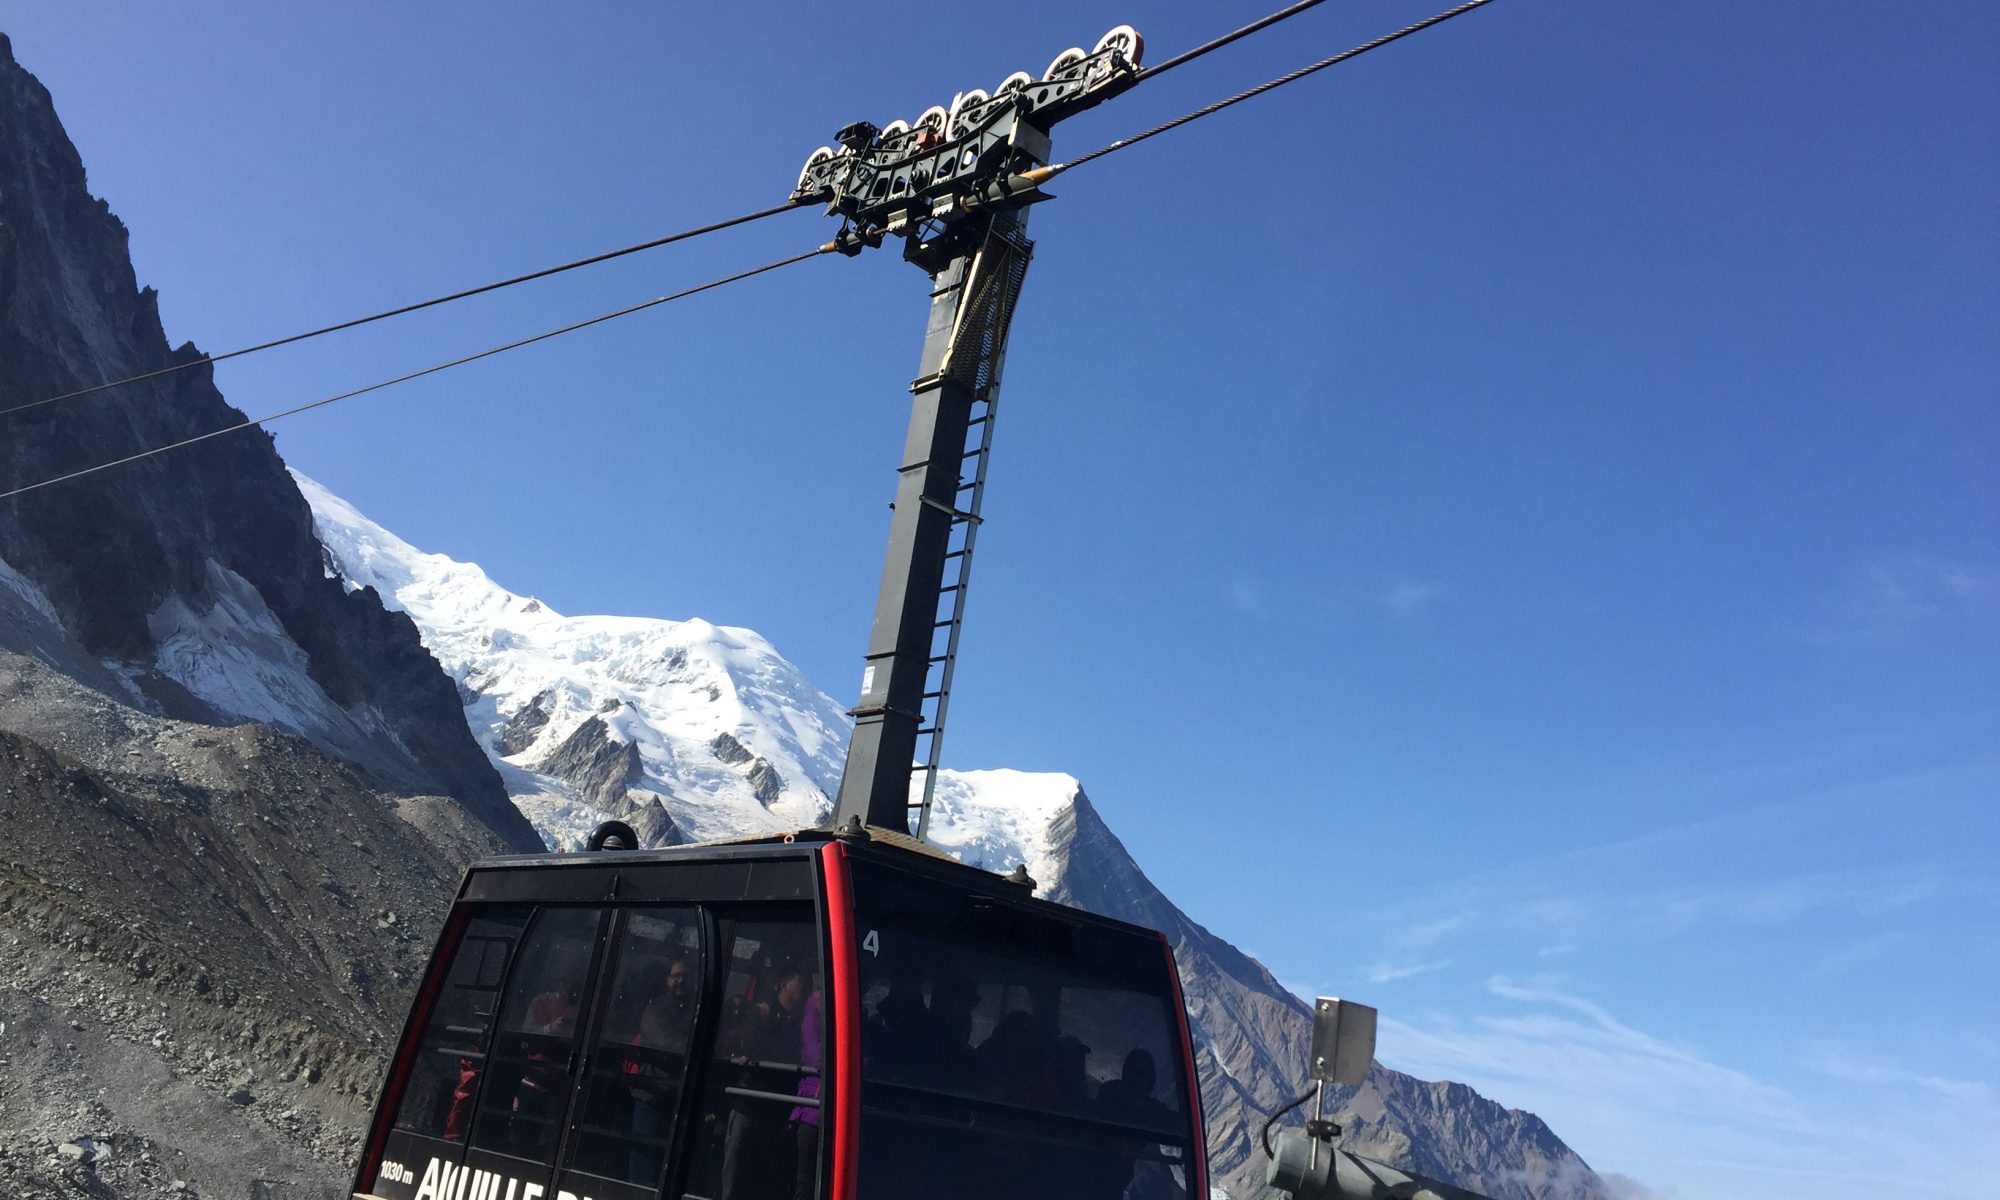 Aiguille du Midi. Chamonix. Differences between skiing in North America and Europe